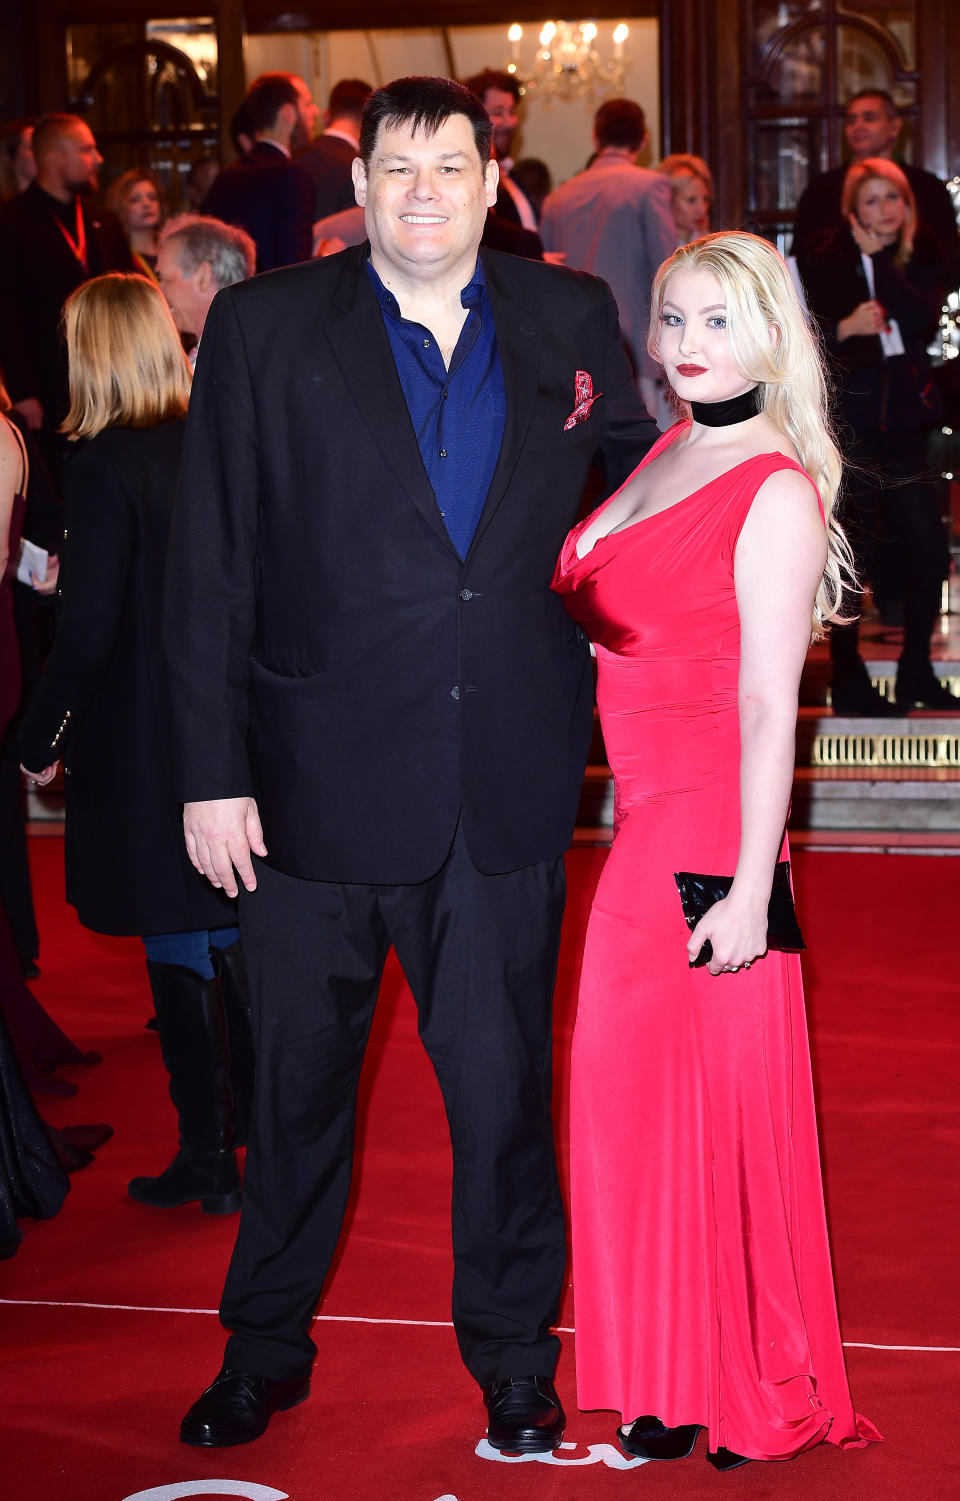 File photo dated 09/11/2017 of Mark Labbett and wife Katie who are to split after their open marriage failed to work, the 55-year-old TV quizzer and Katie, 28, have been married for seven years and have a three-year-old son together.